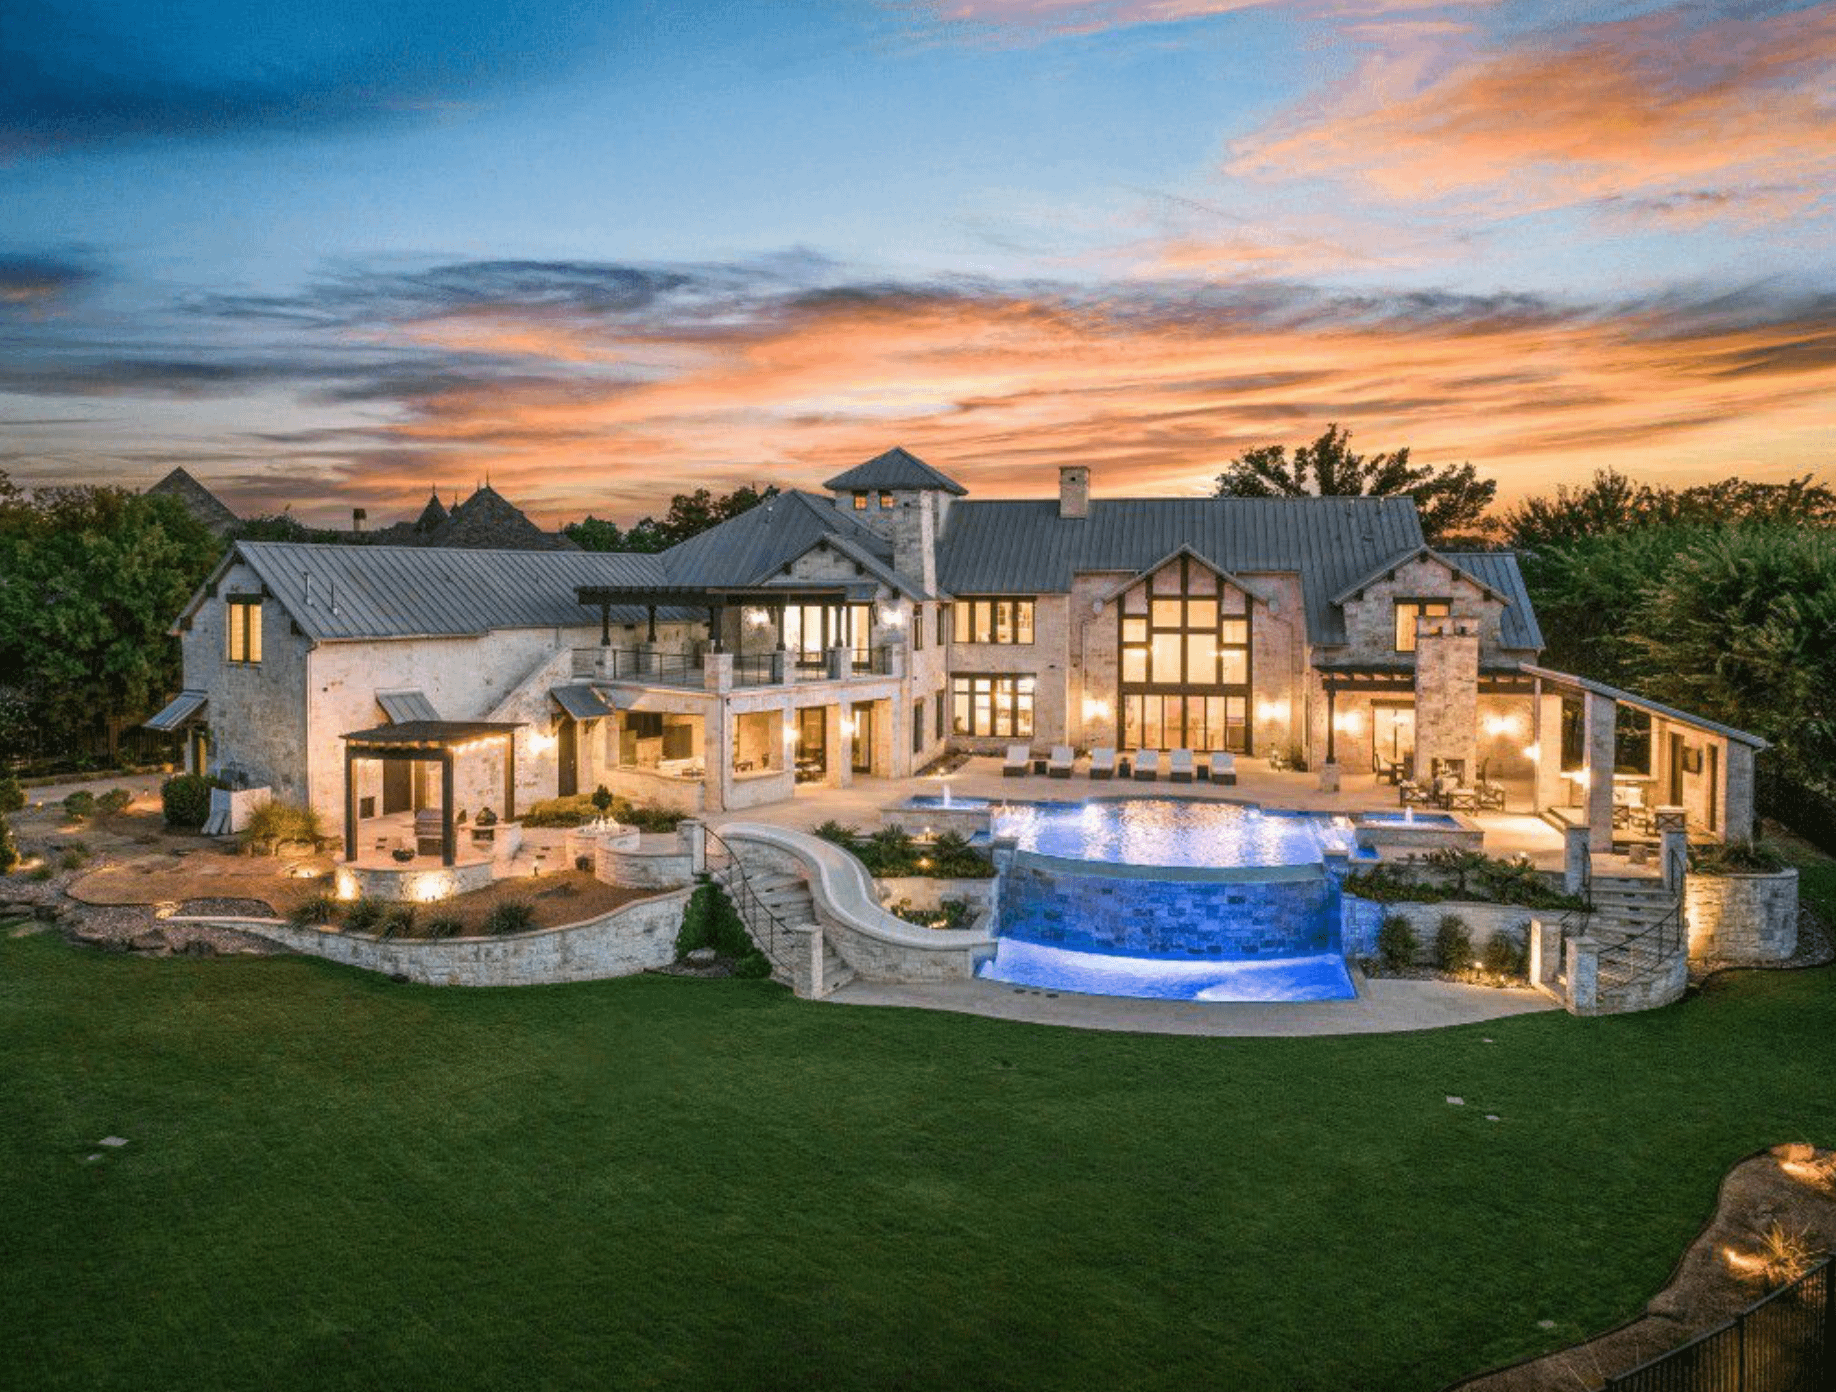 Stone Home In Westlake, Texas With Infinity Pool (PHOTOS)